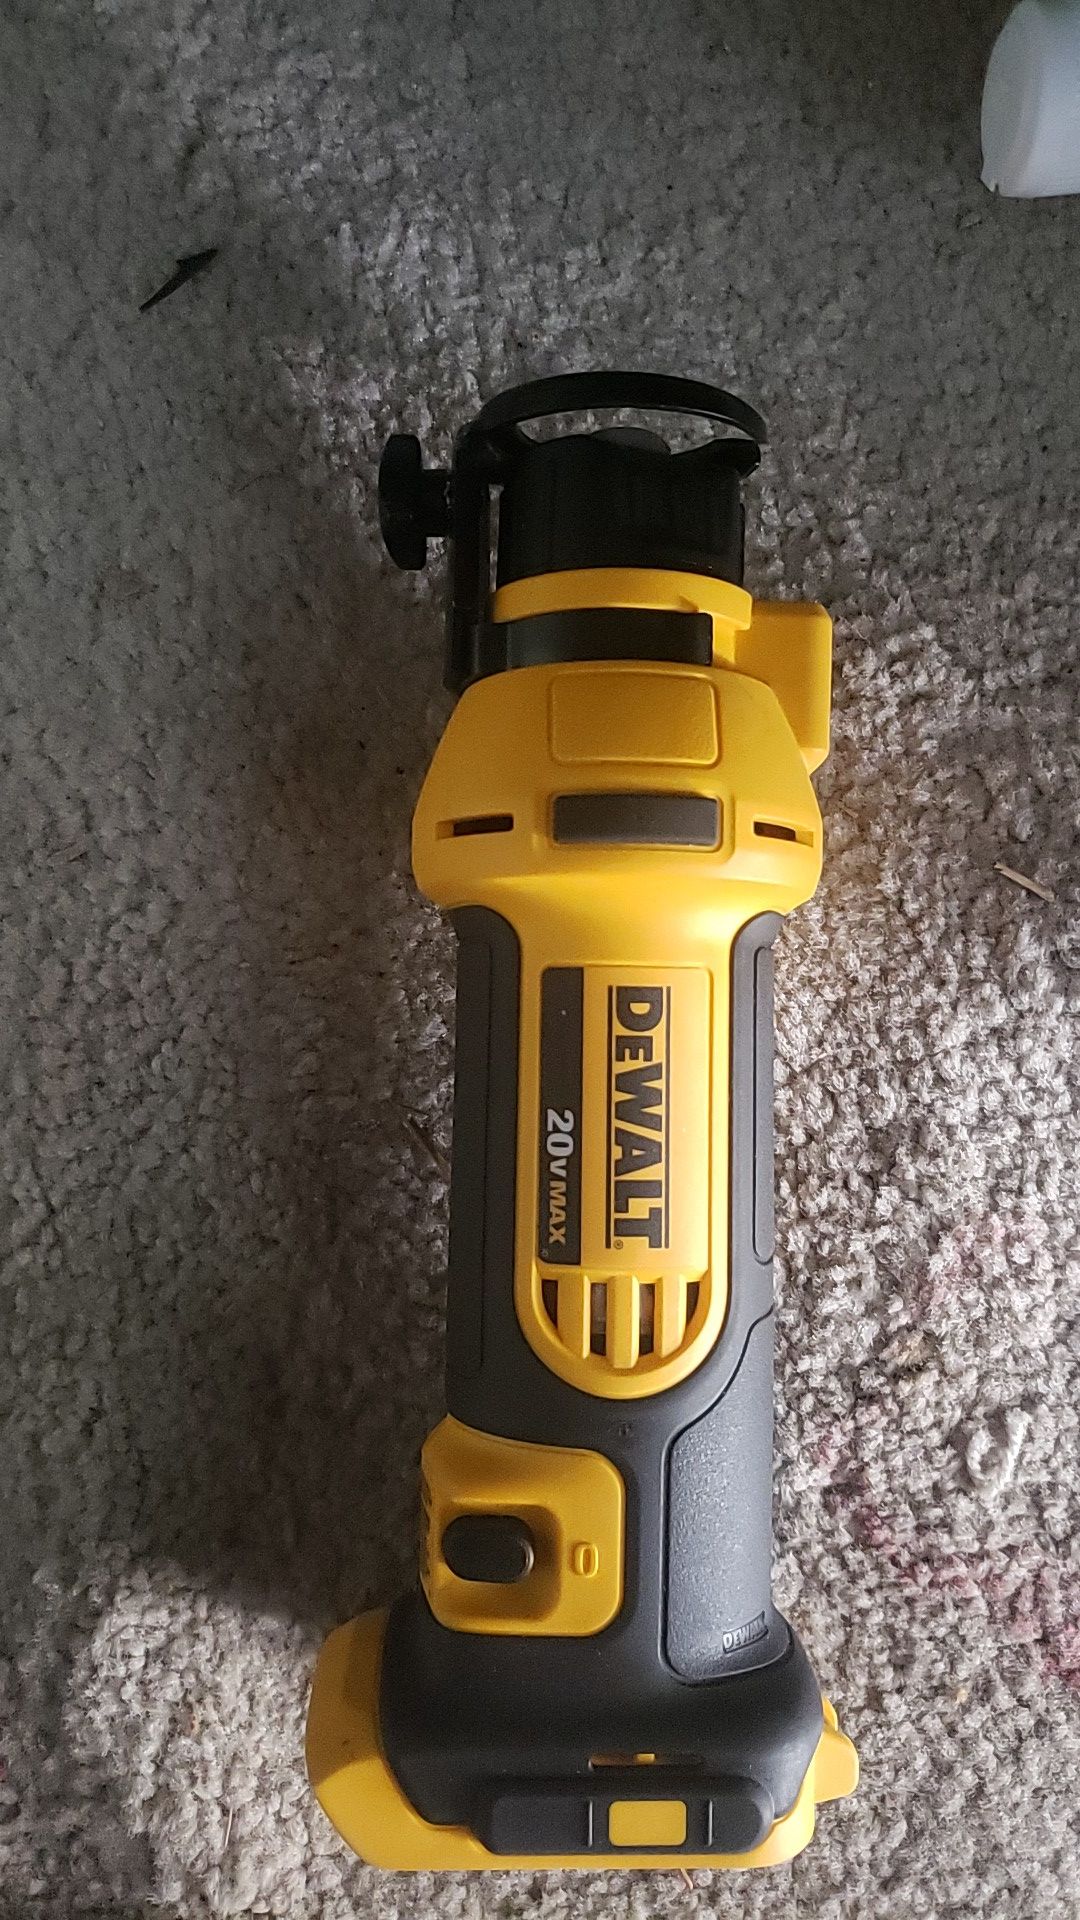 Dewalt rotozip hole saw tool only. Brand new never used